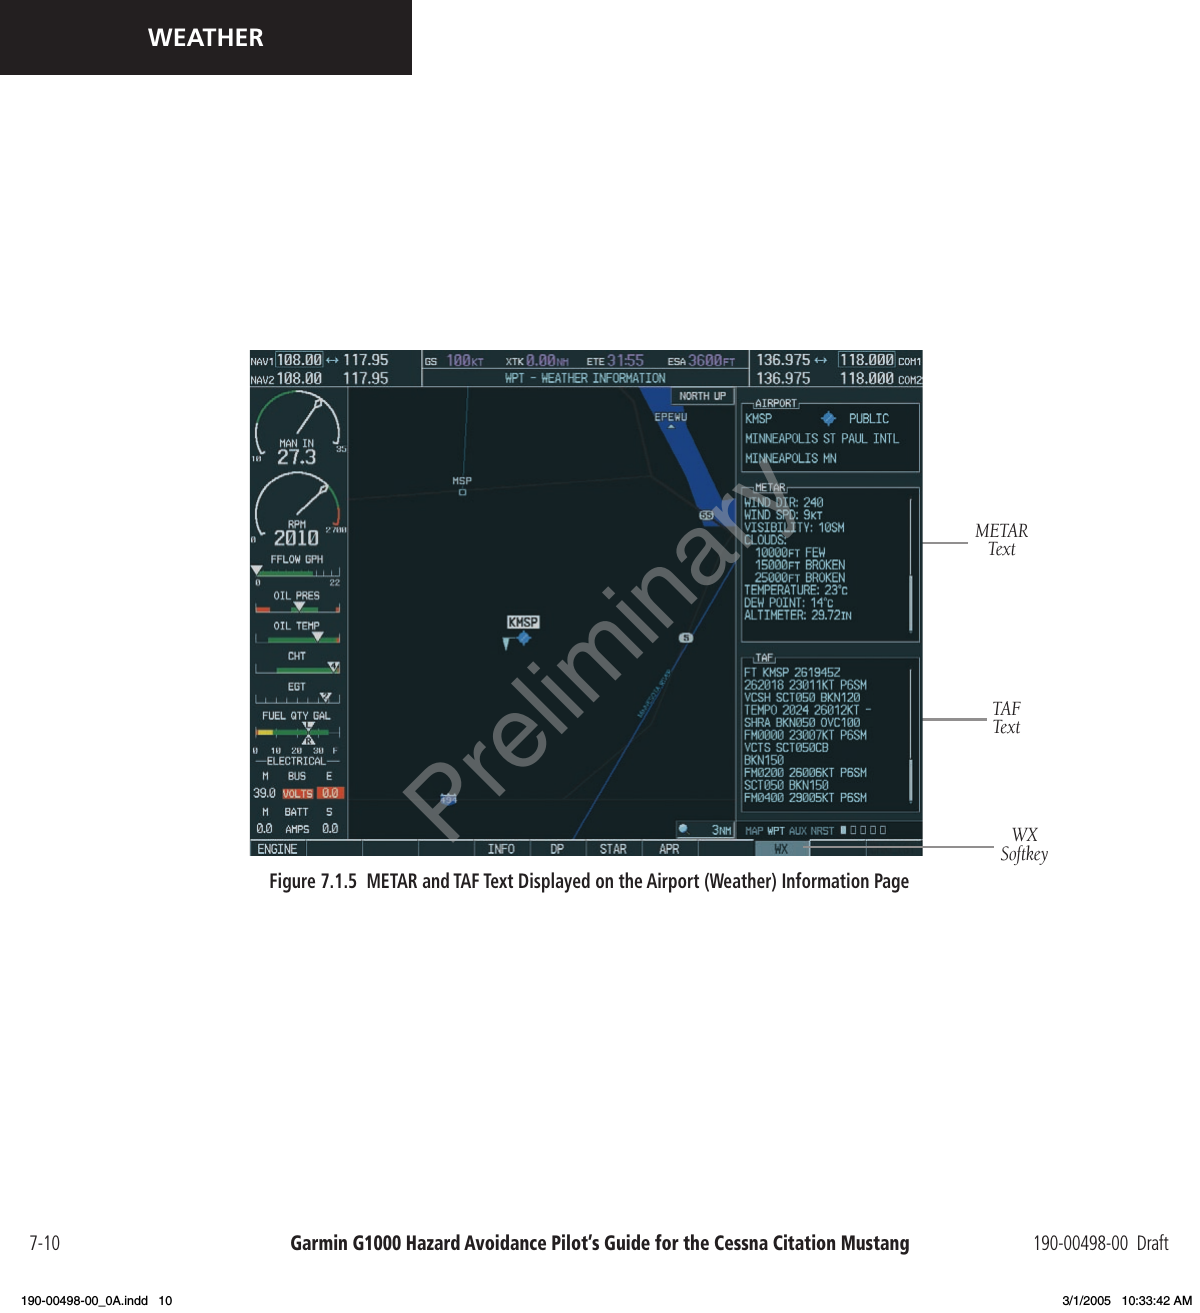 Garmin G1000 Hazard Avoidance Pilot’s Guide for the Cessna Citation Mustang 190-00498-00  Draft7-10WEATHERFigure 7.1.5  METAR and TAF Text Displayed on the Airport (Weather) Information PageMETAR TextTAF TextWX SoftkeyPreliminary190-00498-00_0A.indd   10 3/1/2005   10:33:42 AM